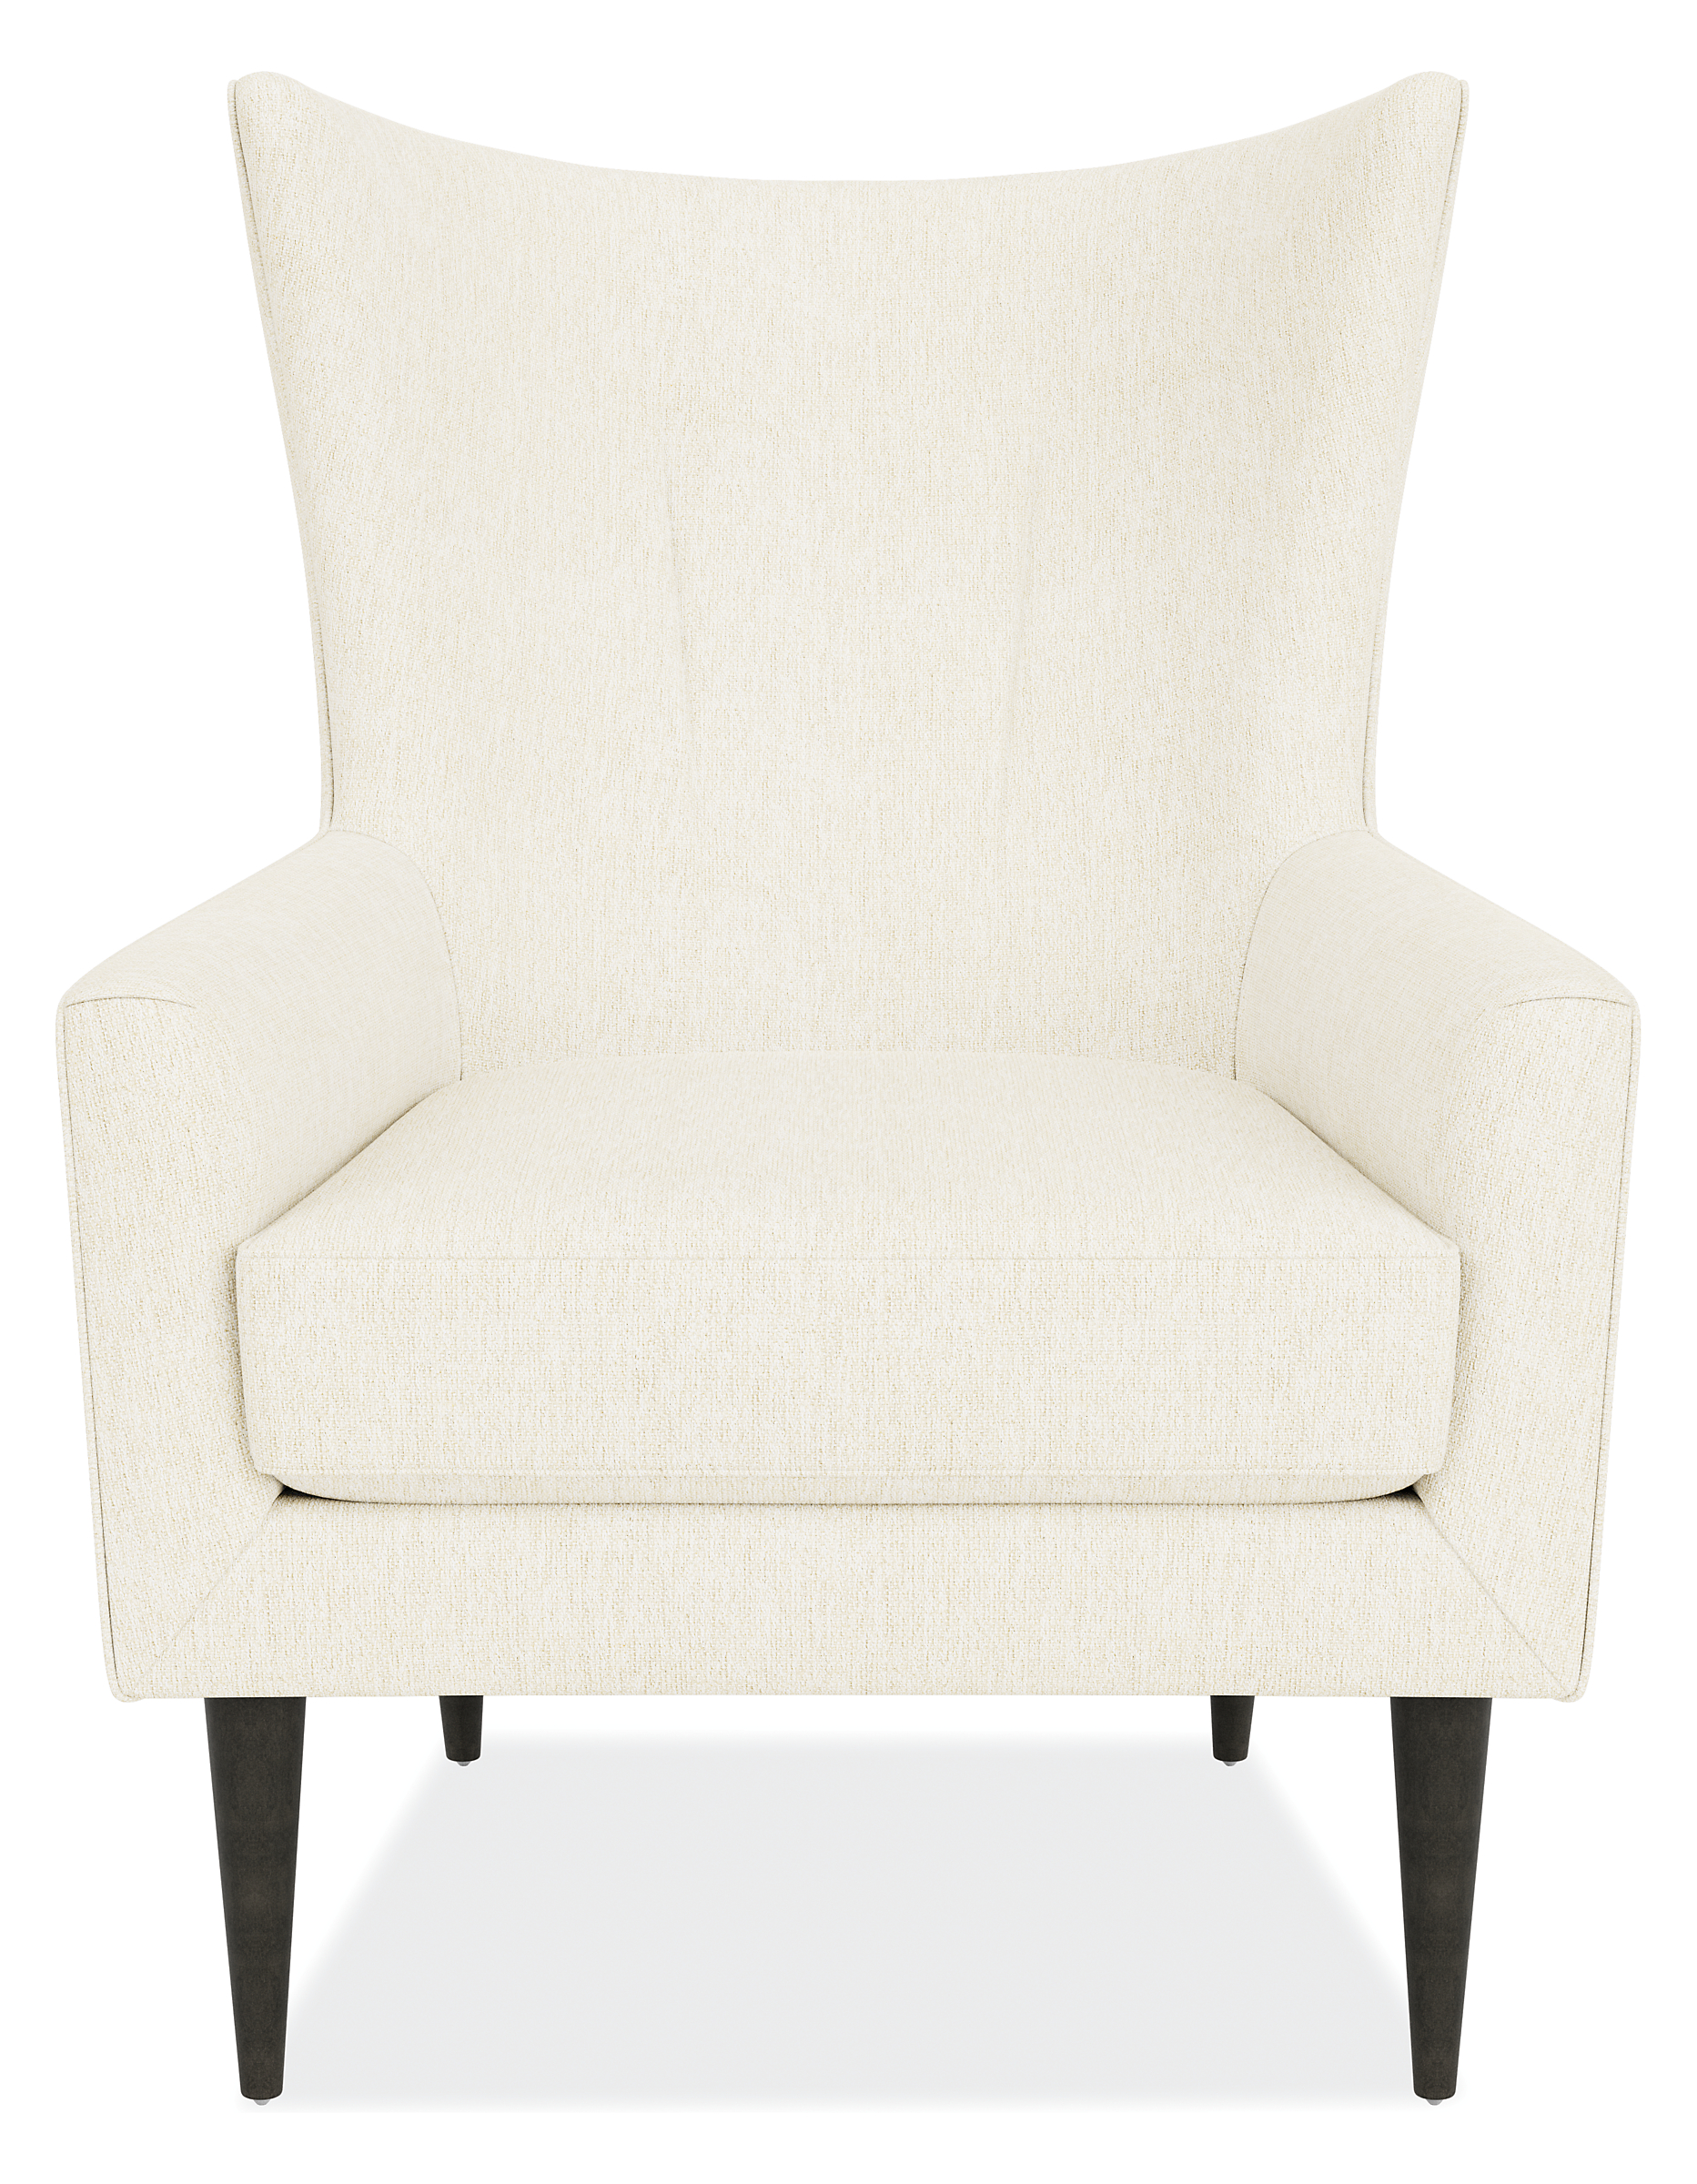 Front view of Bradford Chair in Tepic White.